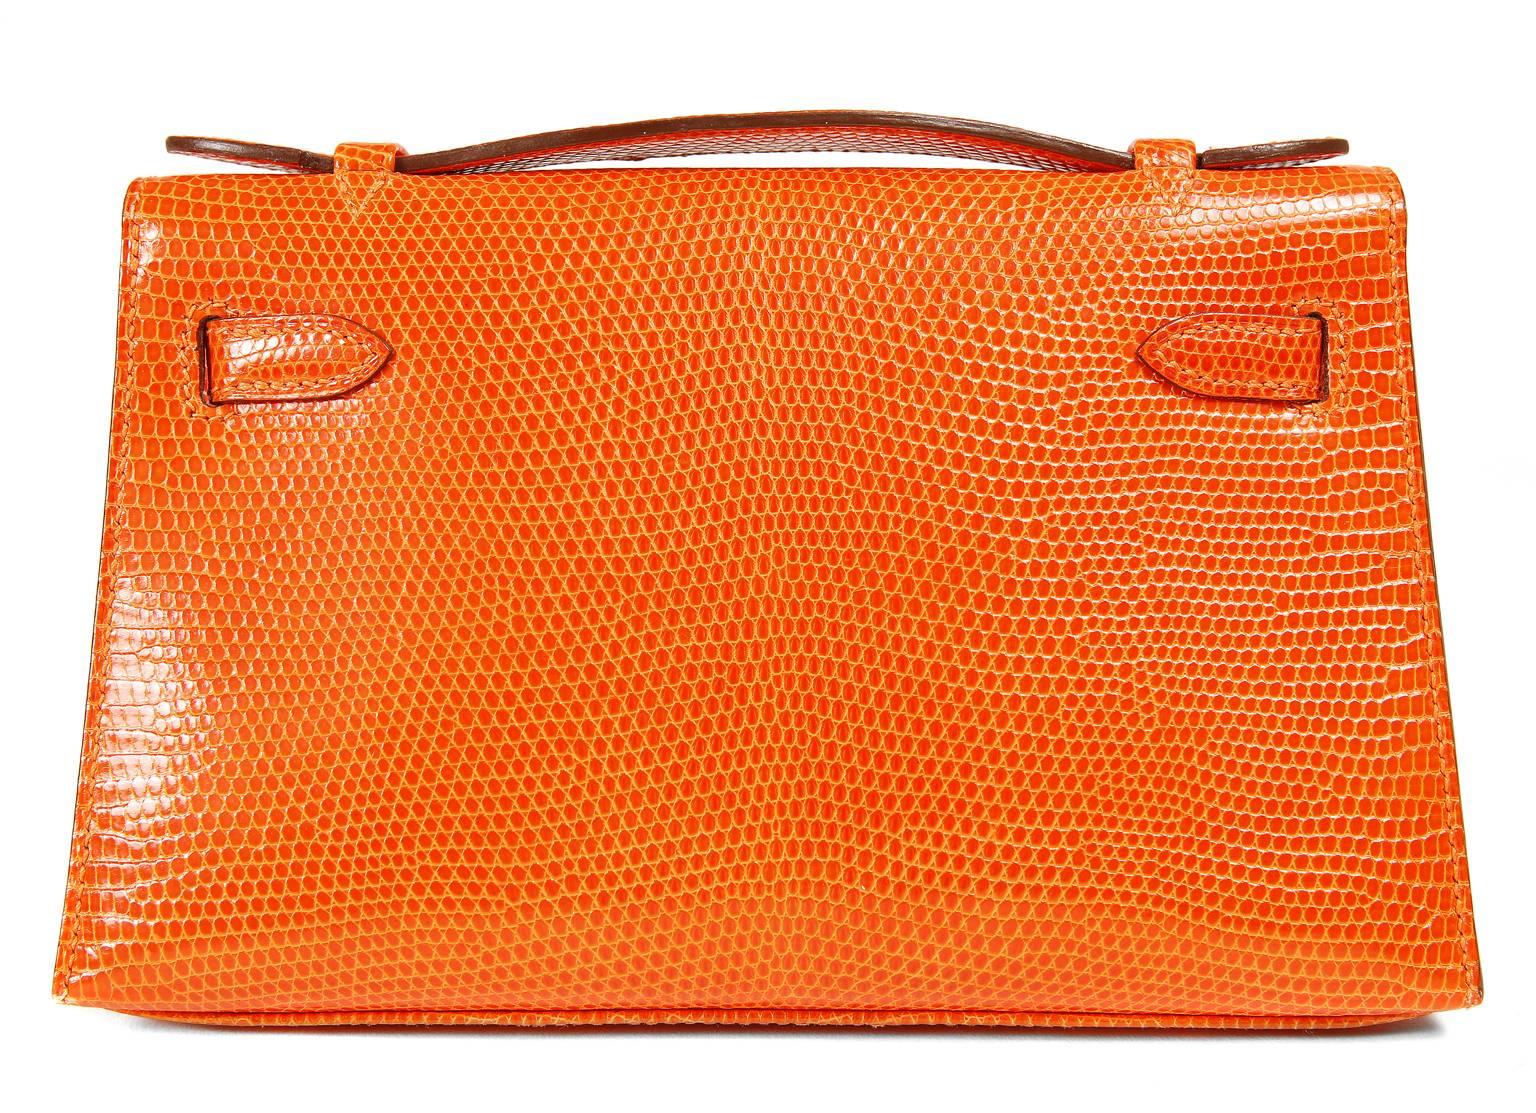 Hermès Orange Lizard Kelly Pochette-  PRISTINE
Hand crafted by skilled artisans, this collectible Hermès is especially rare in exotic lizard skin. 
 
Orange lizard skin is a brilliant pop of color that displays the texture of this exotic